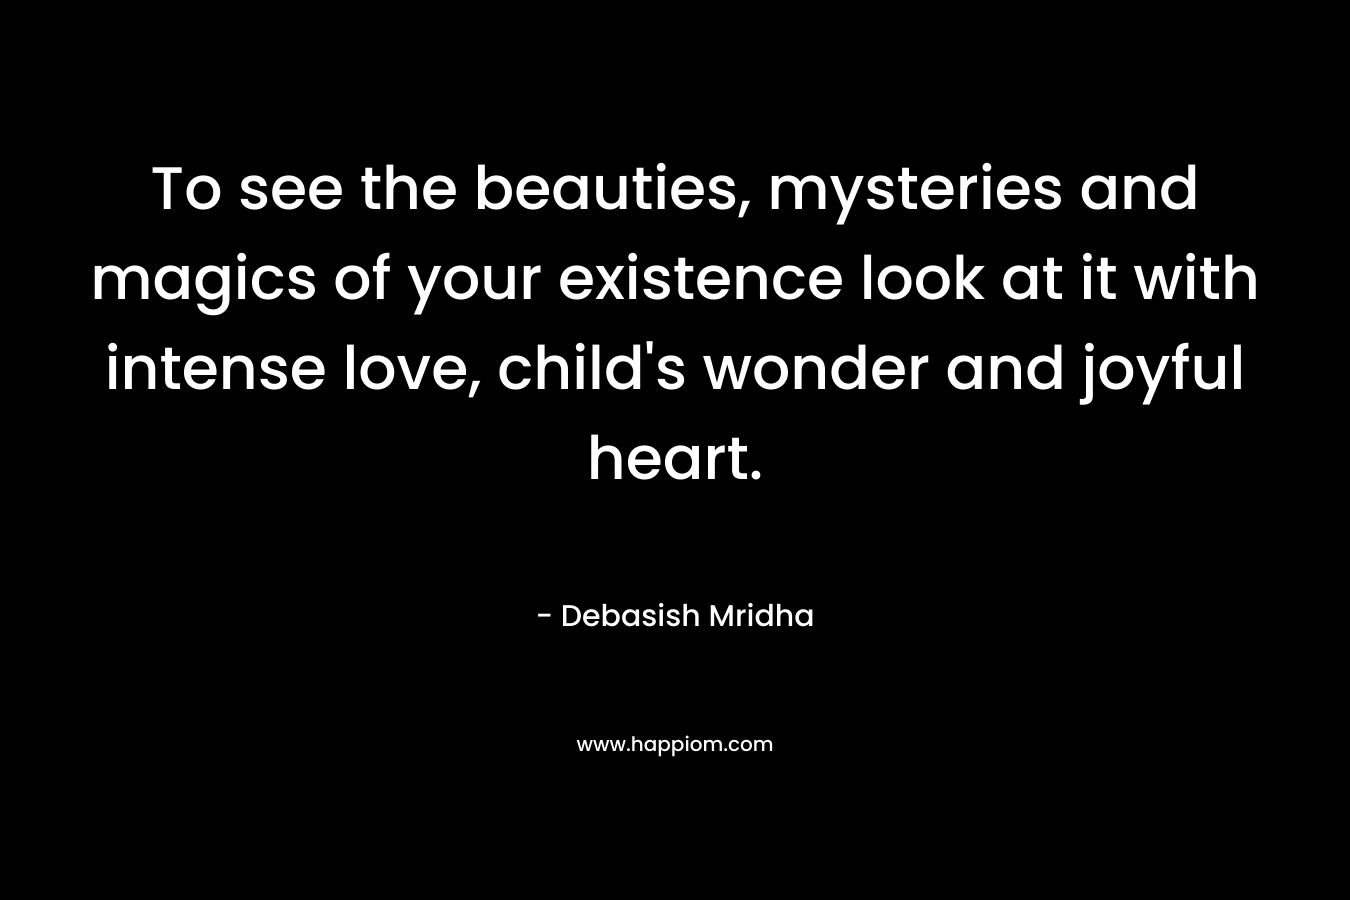 To see the beauties, mysteries and magics of your existence look at it with intense love, child’s wonder and joyful heart. – Debasish Mridha